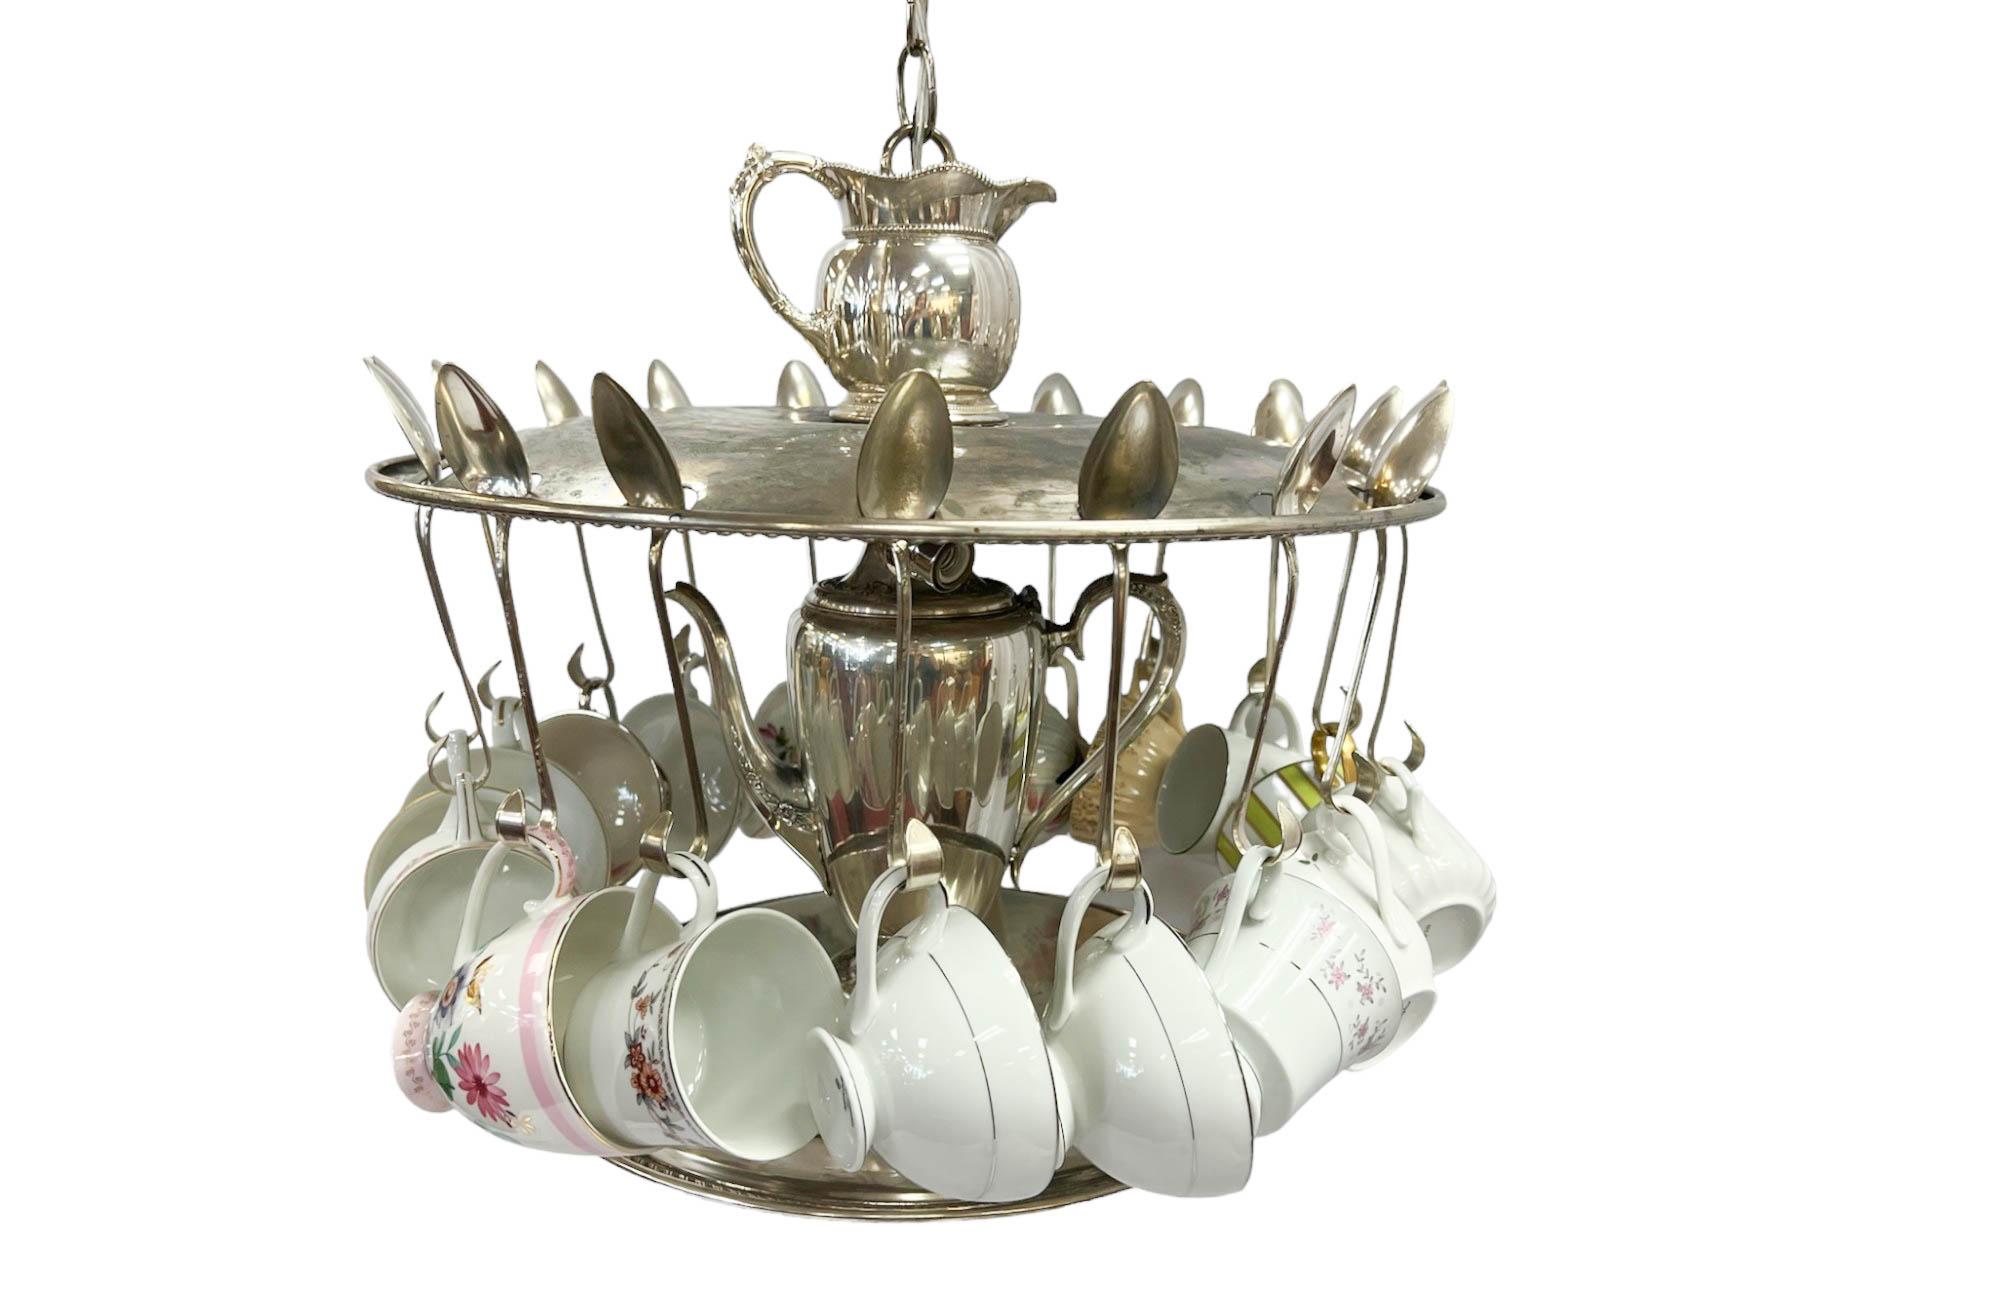 Hand-Crafted Vintage One-Of-A-Kind Handcrafted Teacup Chandelier For Sale